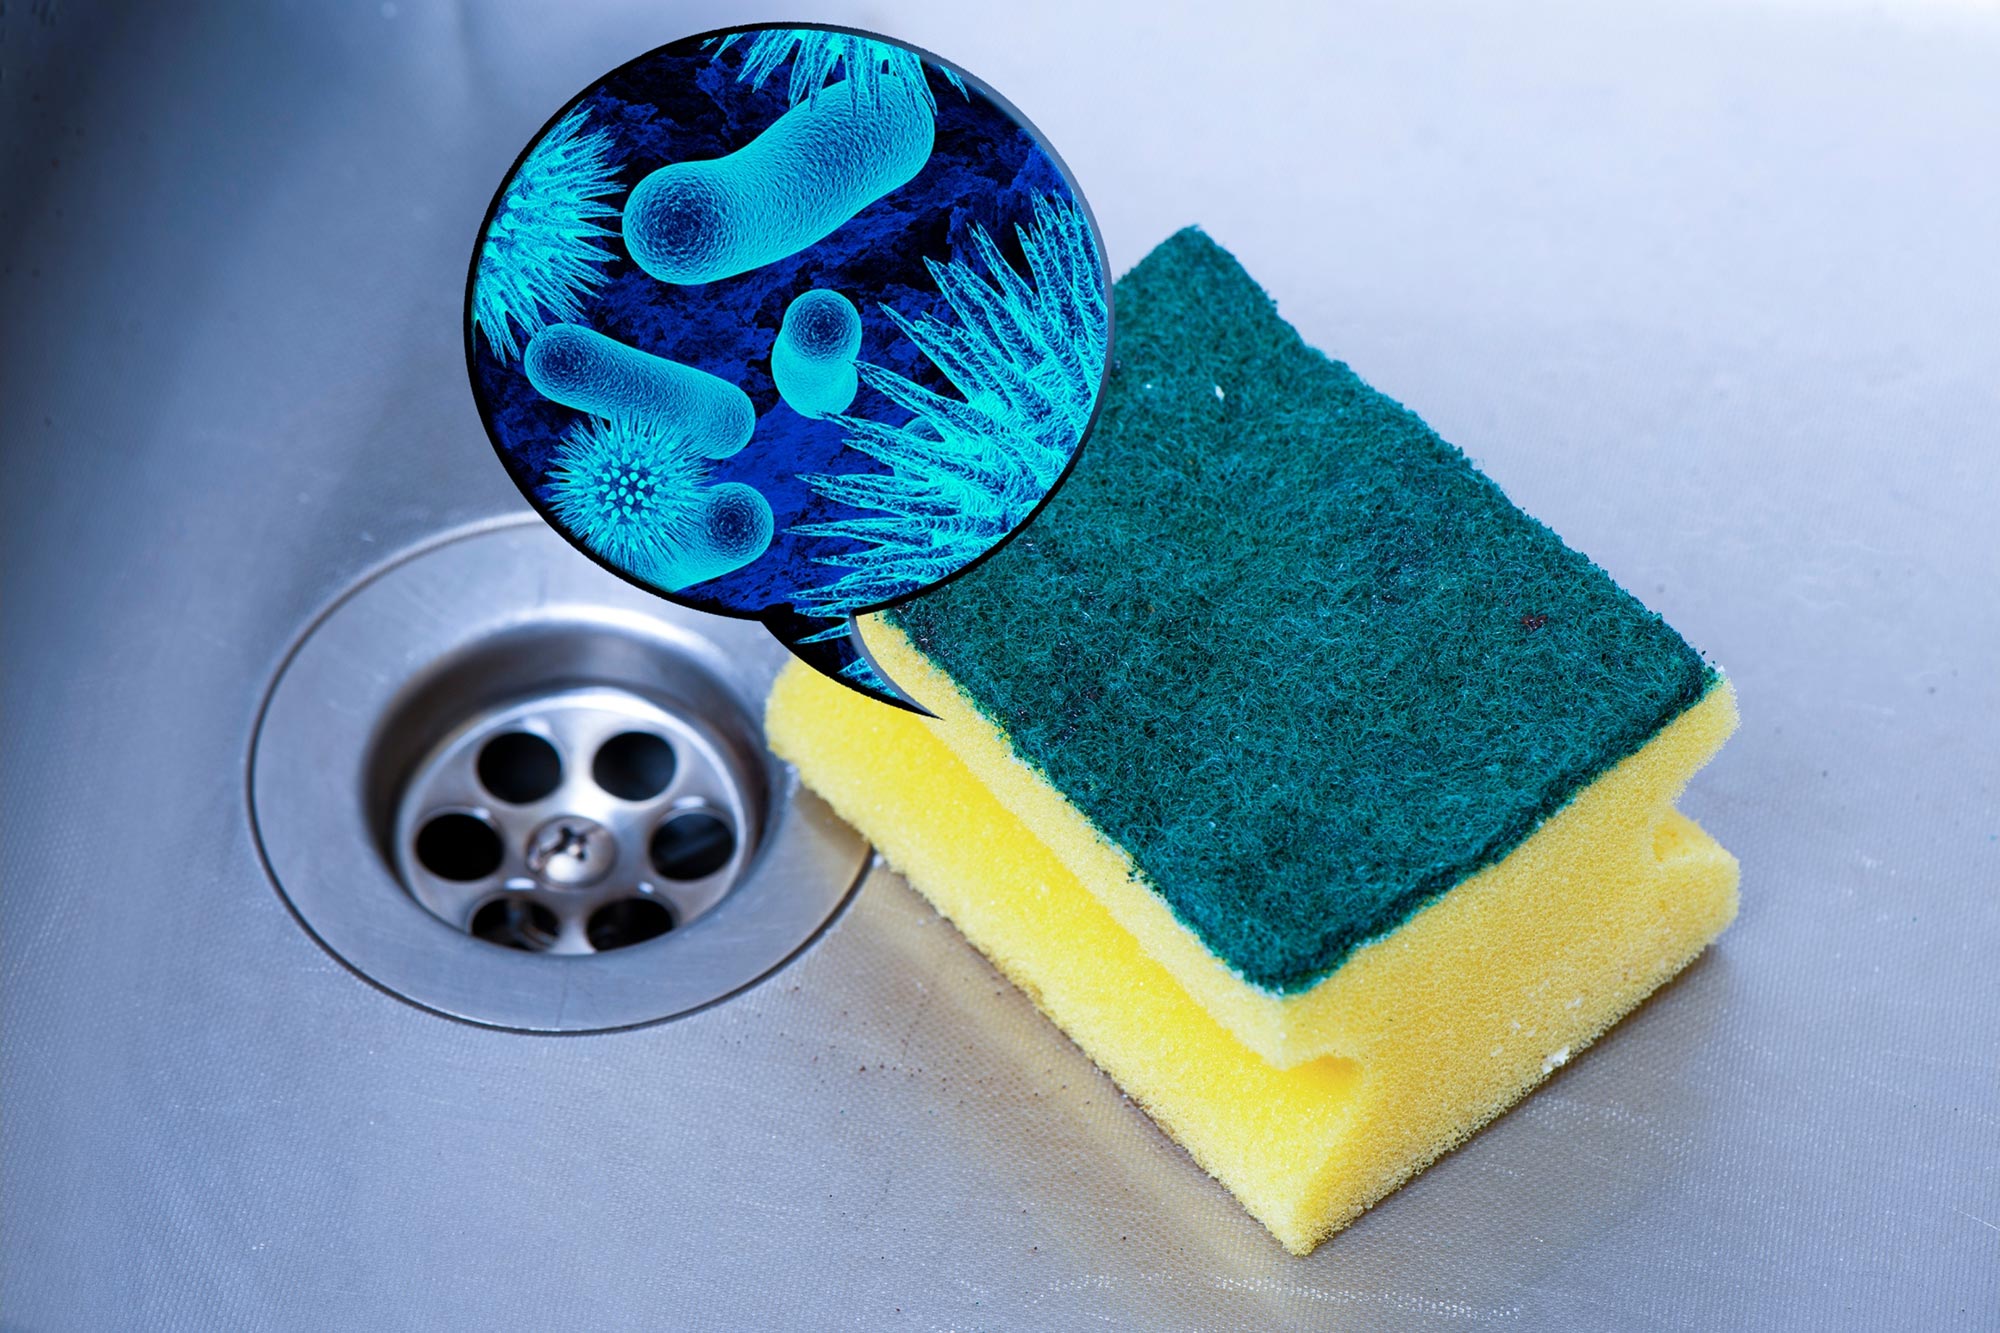 How to Keep Kitchen Sponges Germ-Free